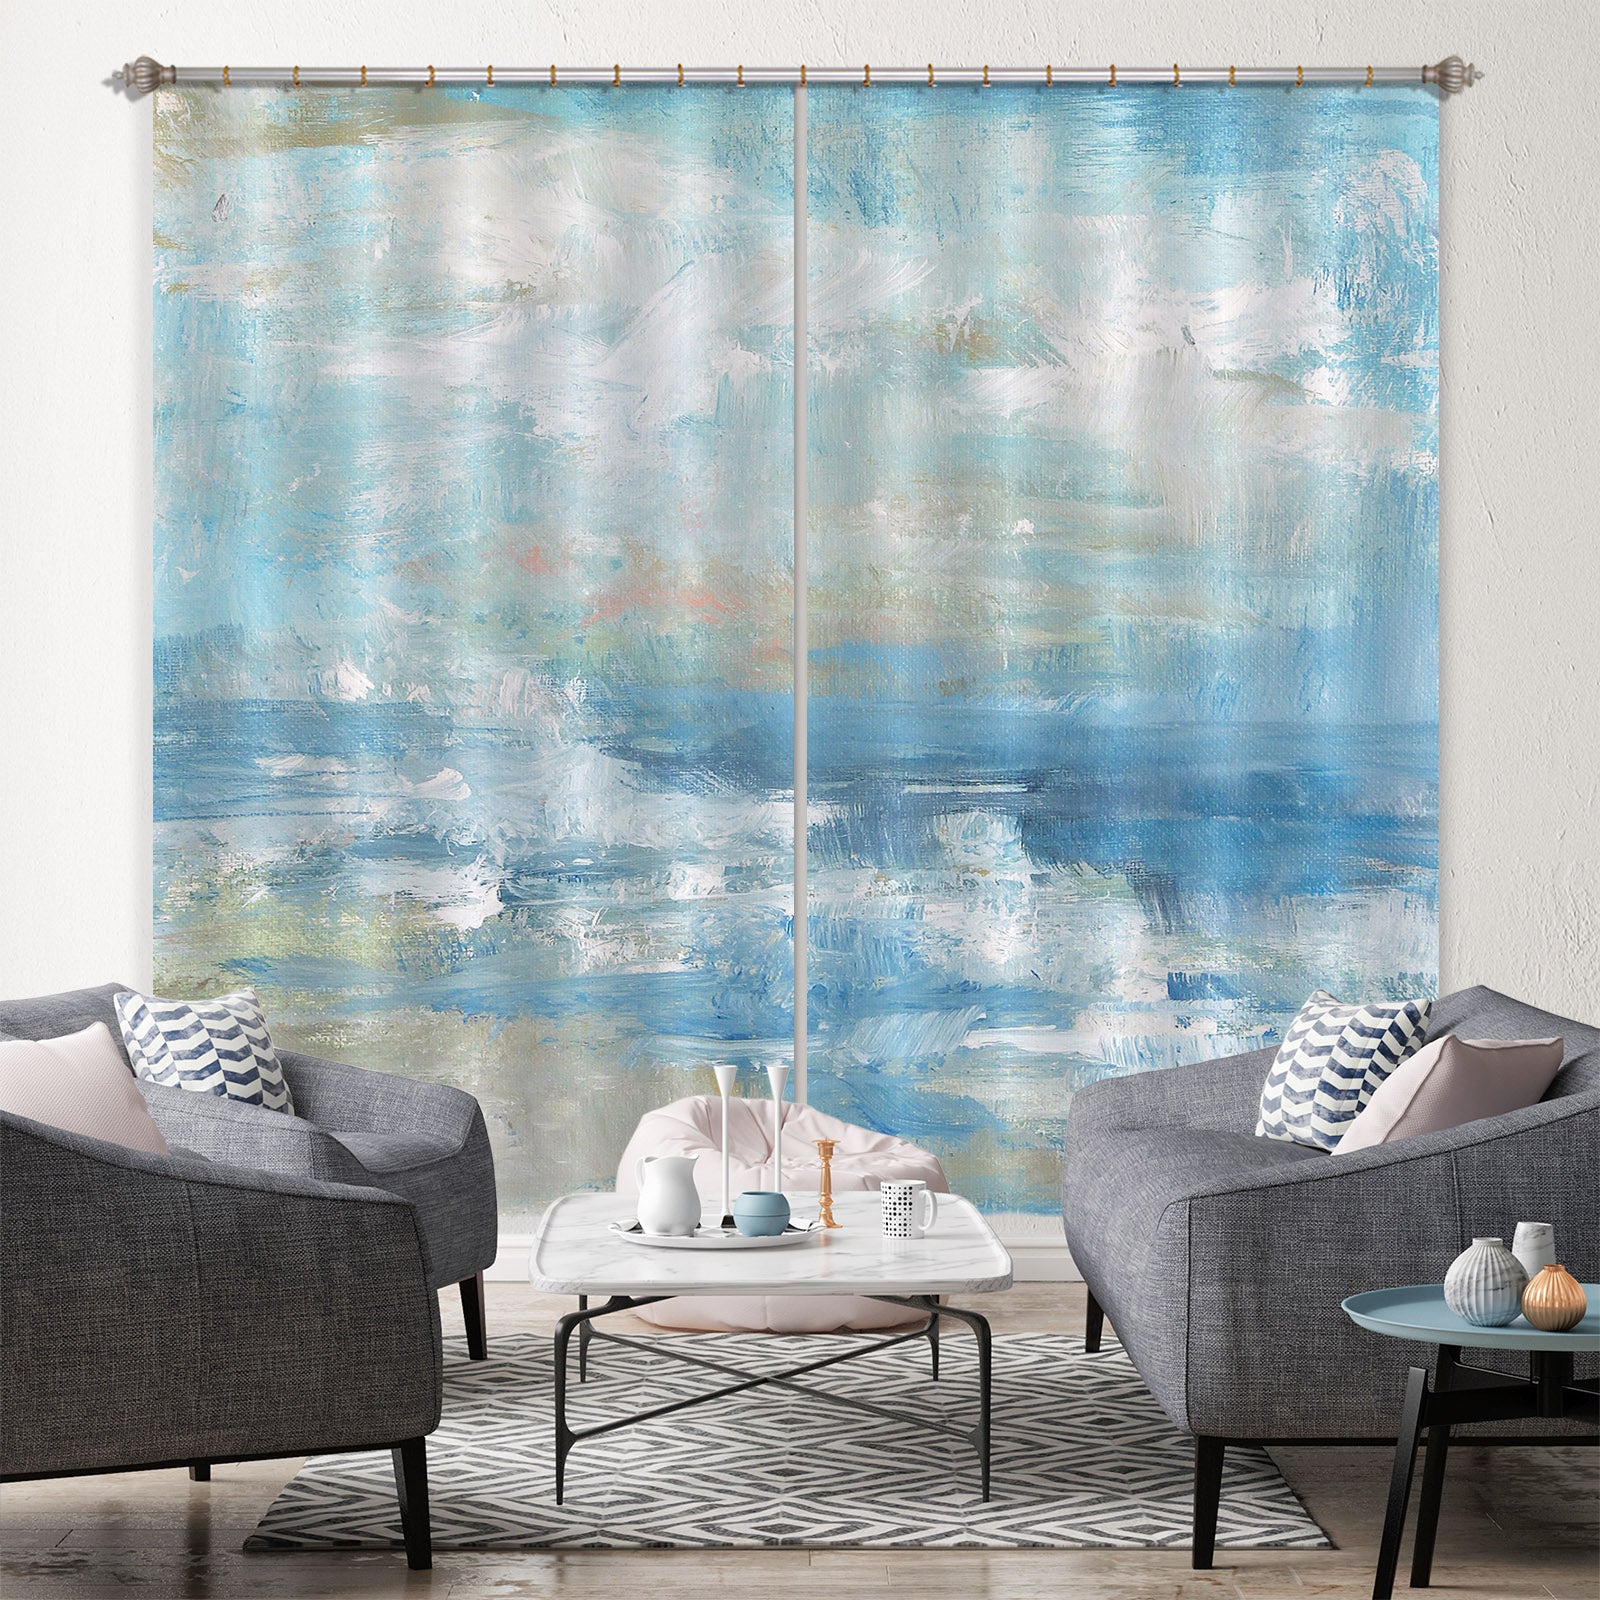 3D Wave Seaside 2202 Debi Coules Curtain Curtains Drapes